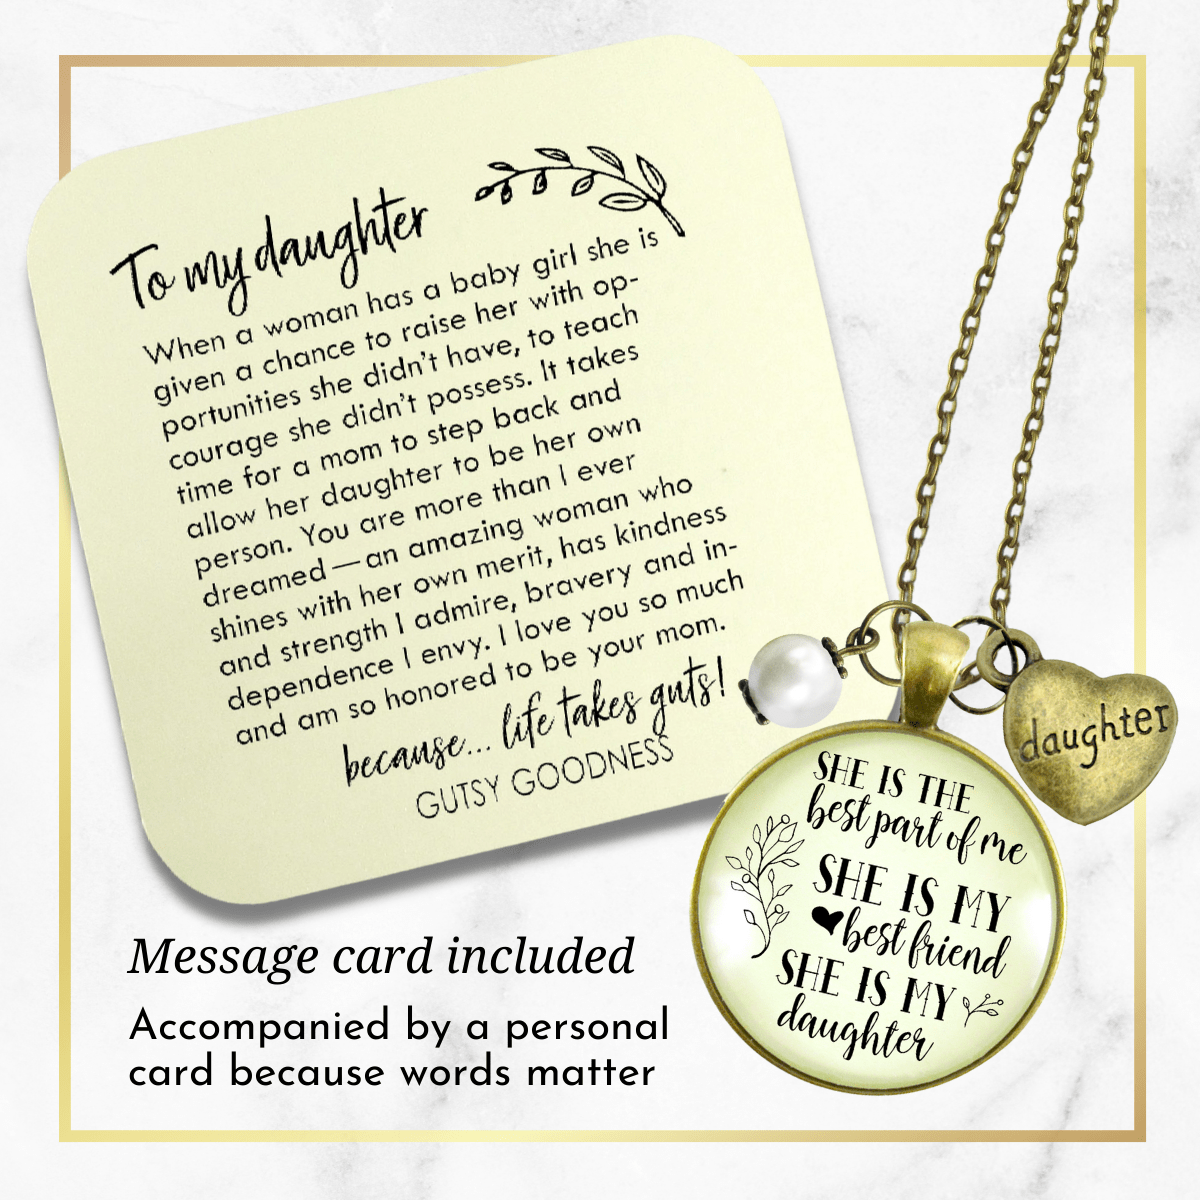 Gutsy Goodness To Daughter From Mother Necklace Best Part of Me My Daughter Jewelry Gift - Gutsy Goodness Handmade Jewelry;To Daughter From Mother Necklace Best Part Of Me My Daughter Jewelry Gift - Gutsy Goodness Handmade Jewelry Gifts